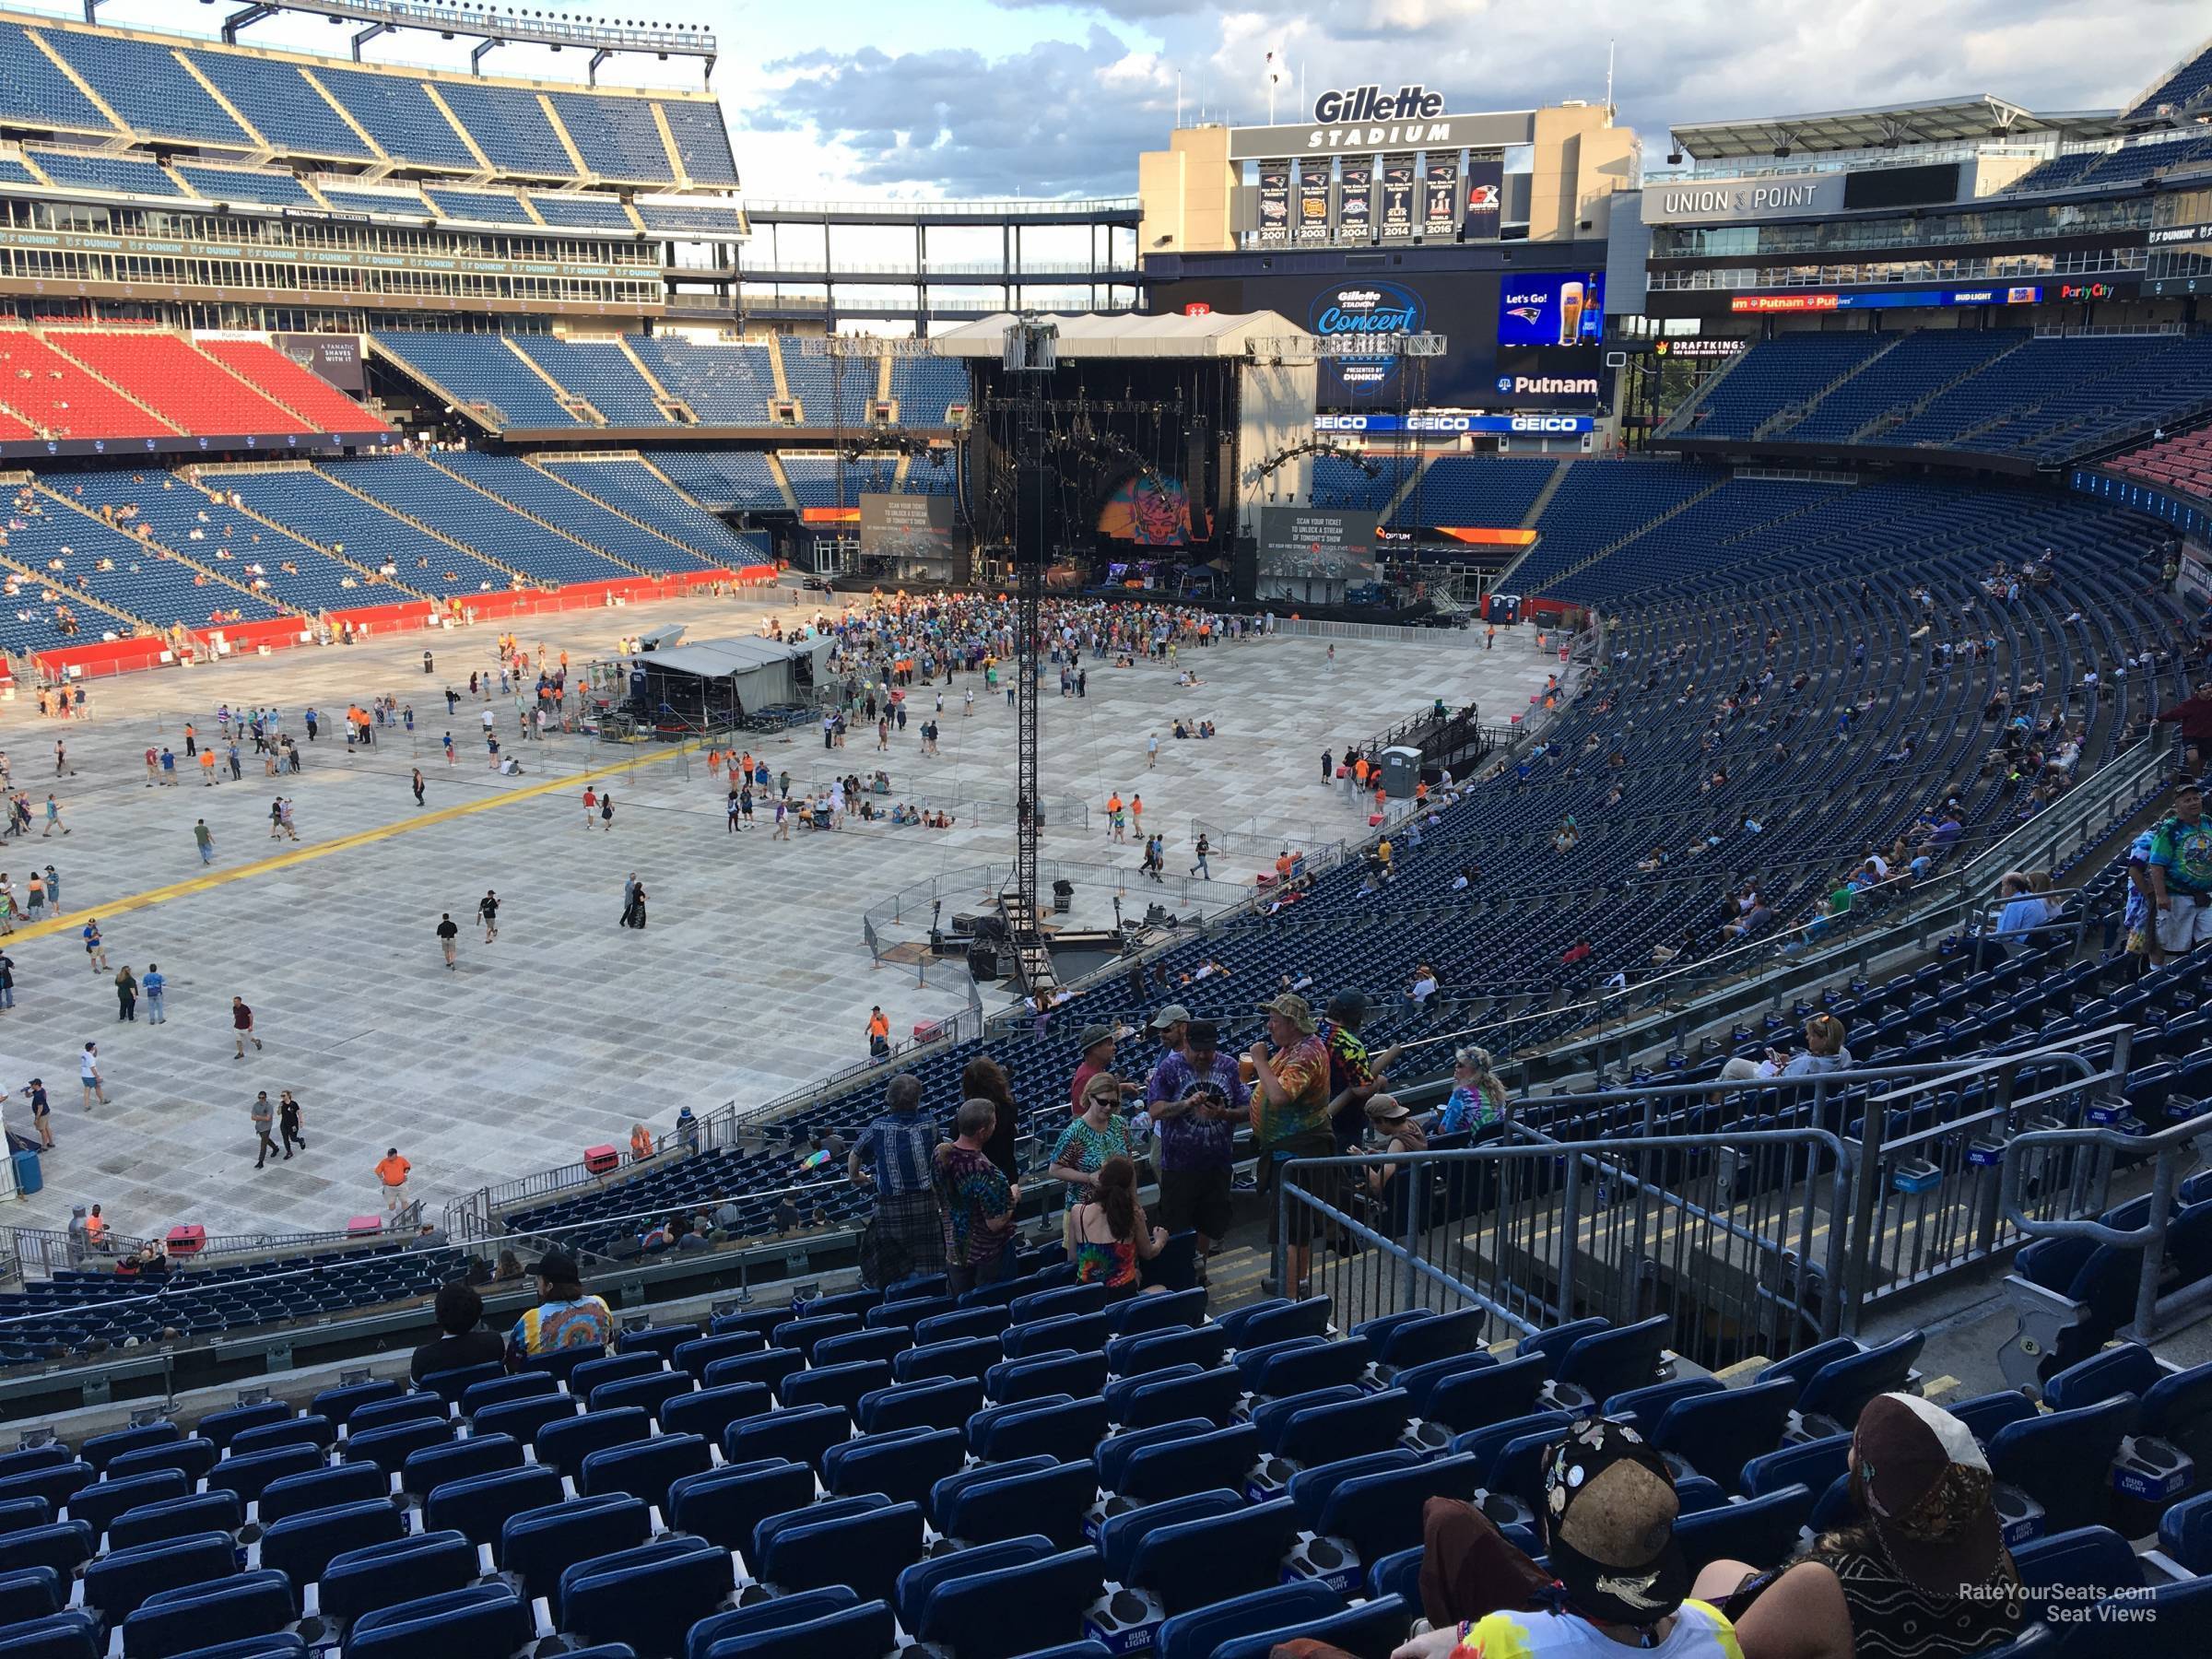 Gillette Stadium Section 238 Concert Seating - RateYourSeats.com